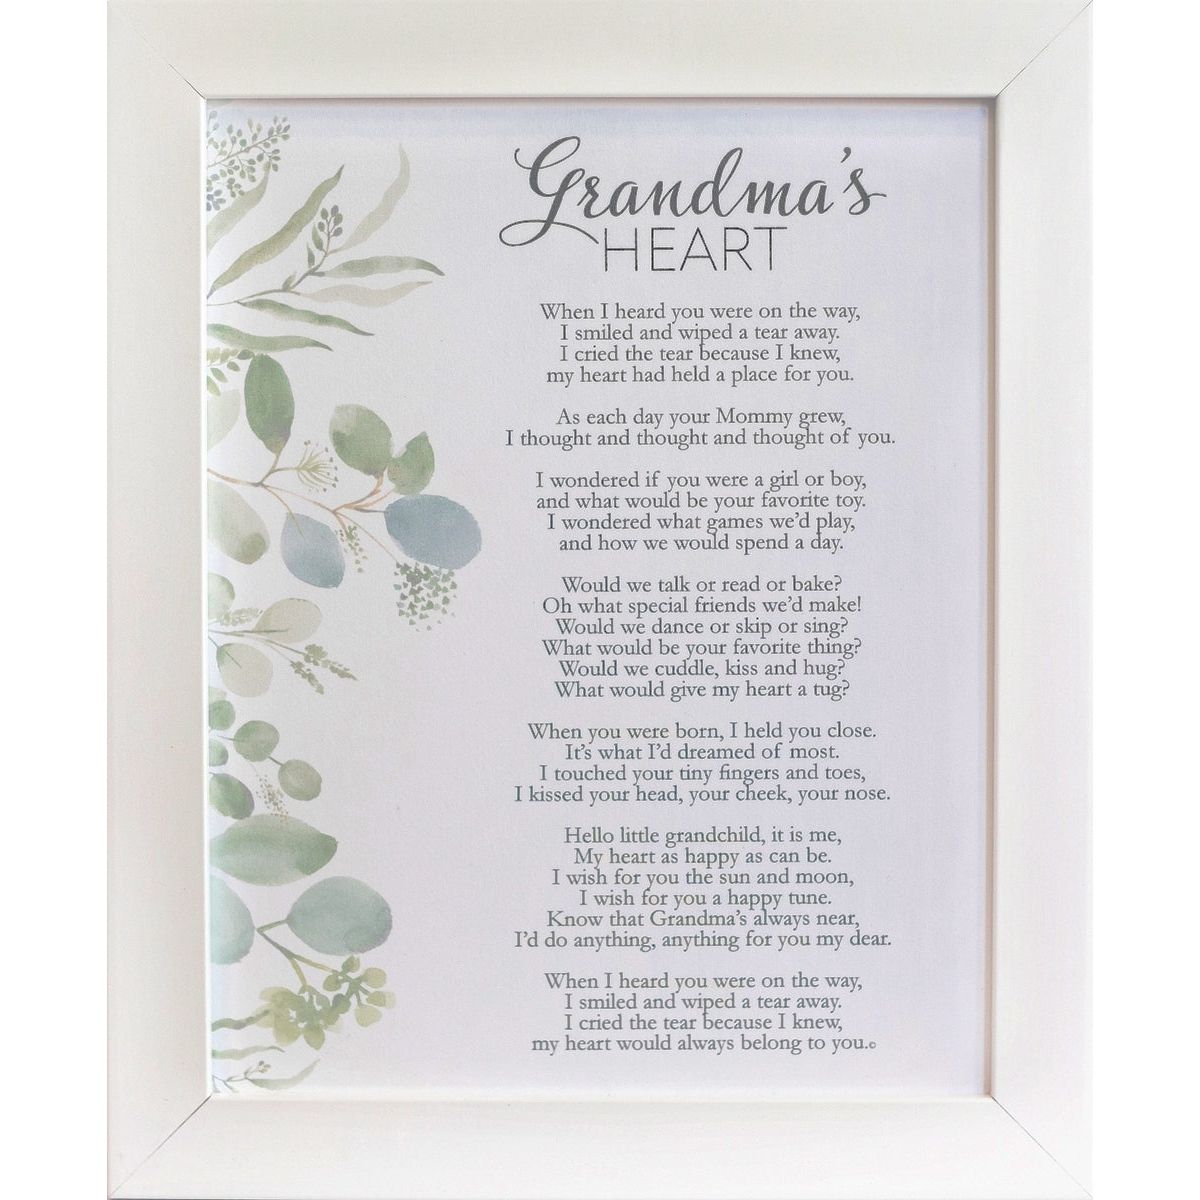 8x10 white frame with "Grandma's Heart" poem with floral artwork.